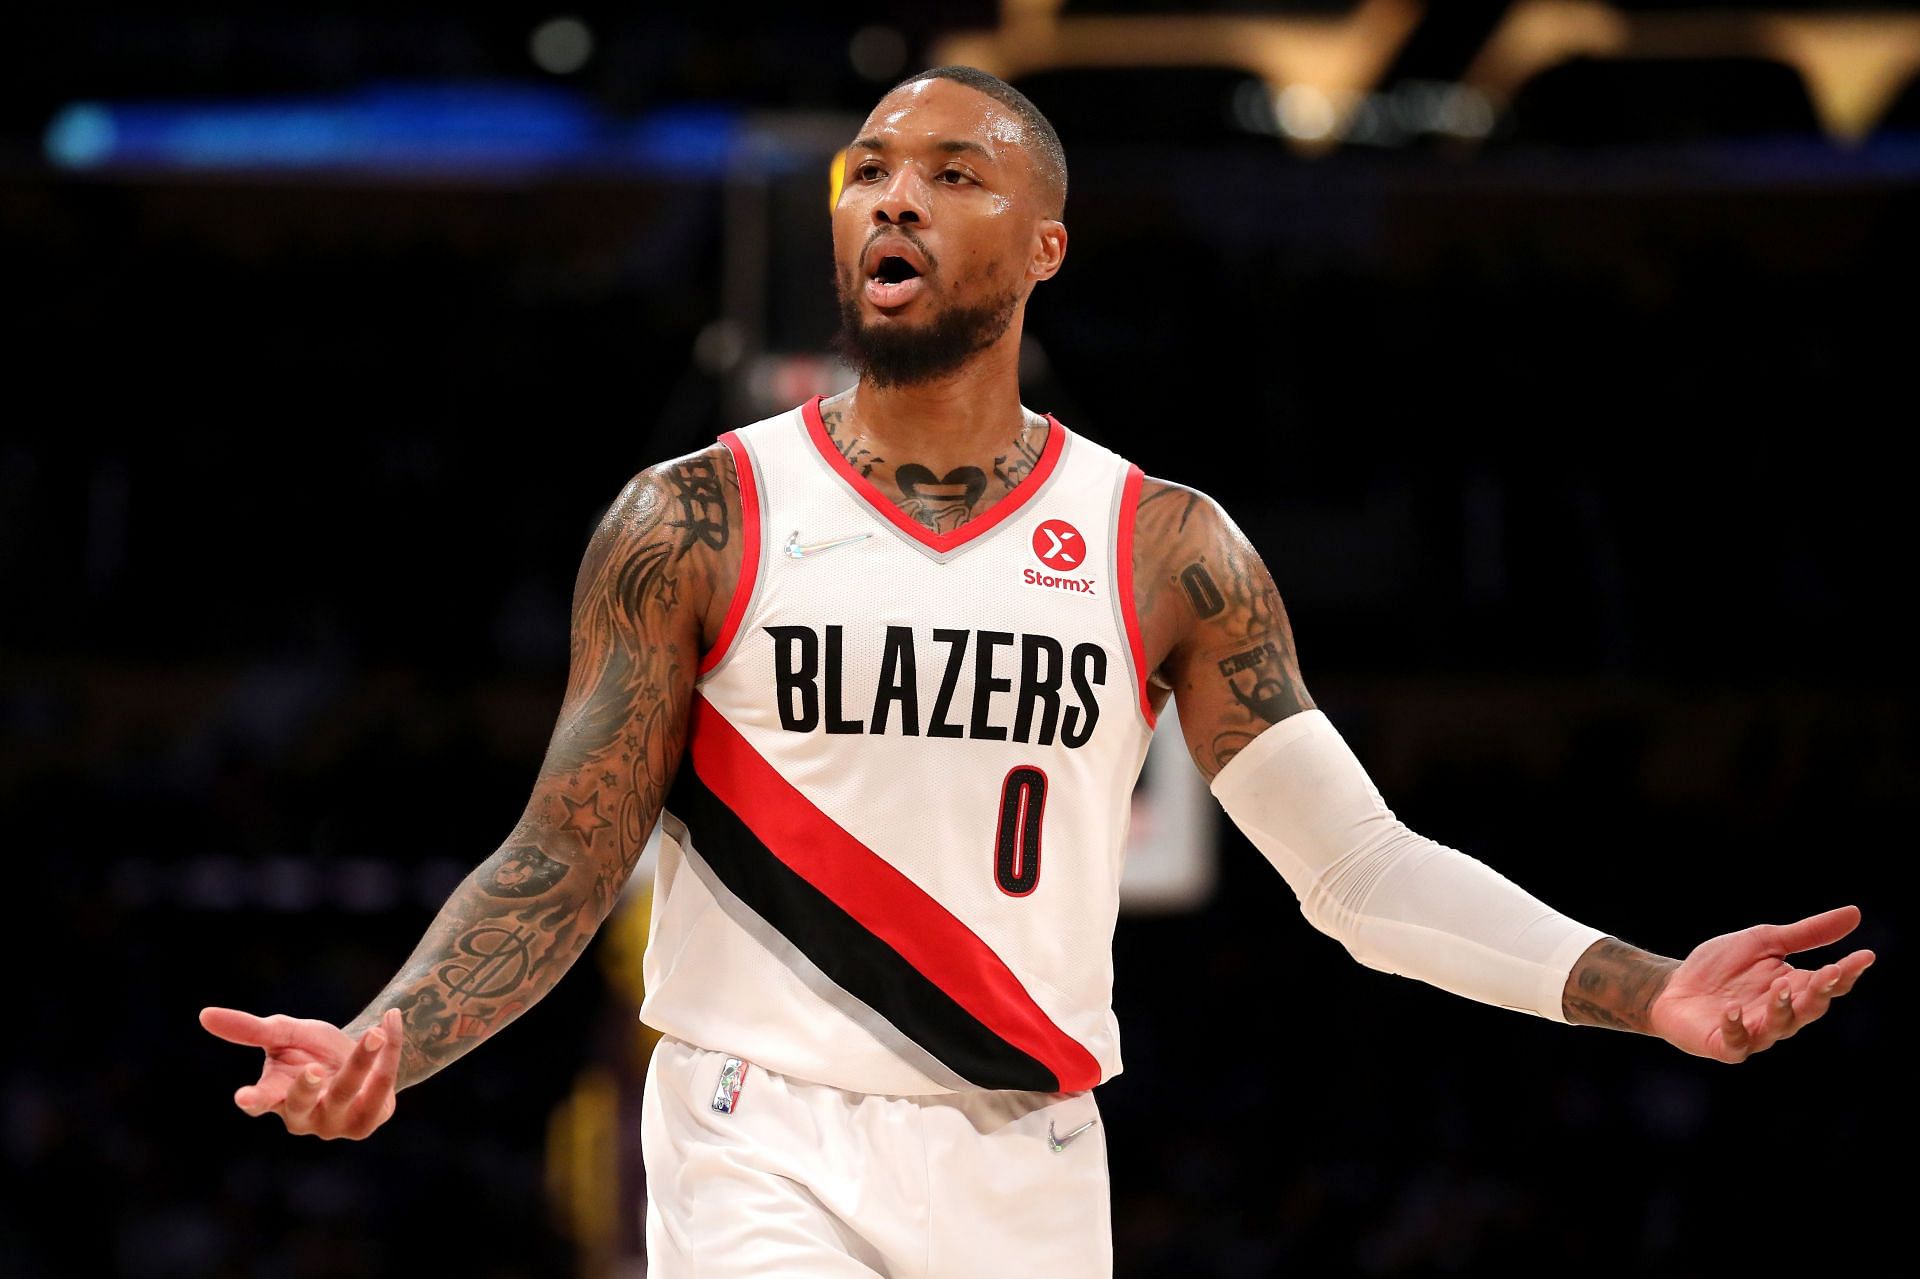 Damian Lillard will be sidelined for an extended period of time